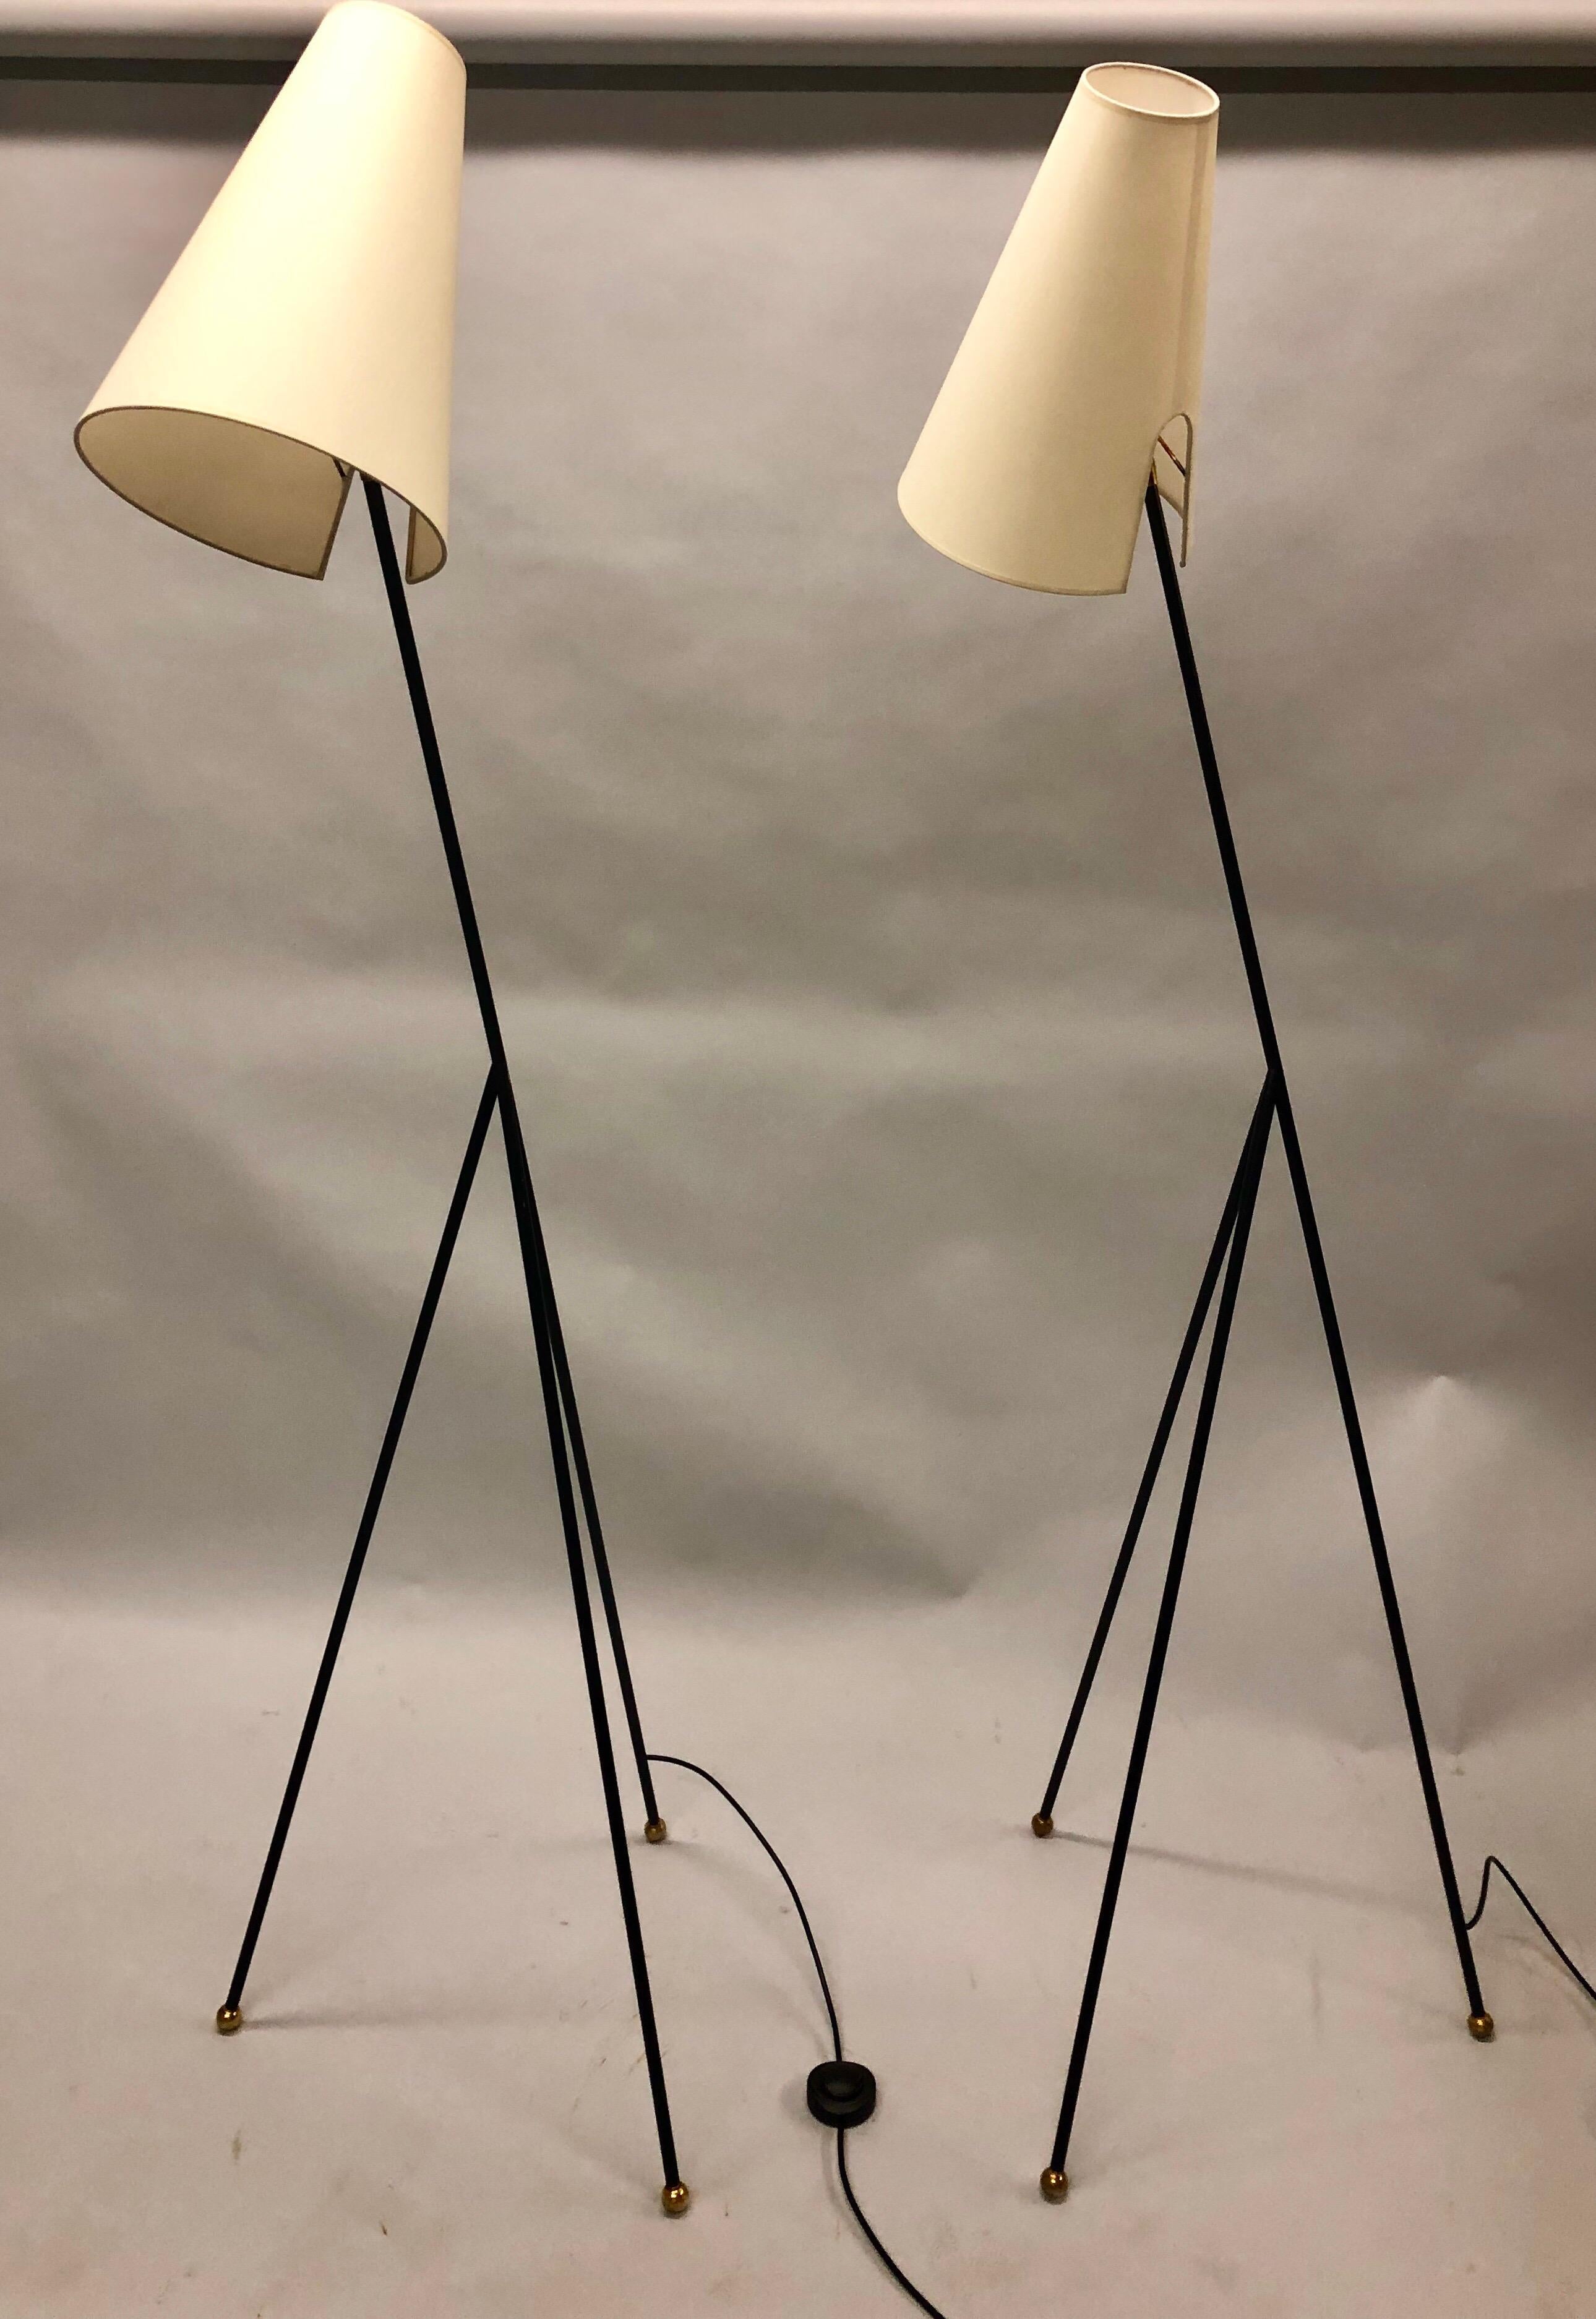 Enameled French Mid-Century Modern Wrought Iron Floor Lamp Attributed Disderot For Sale